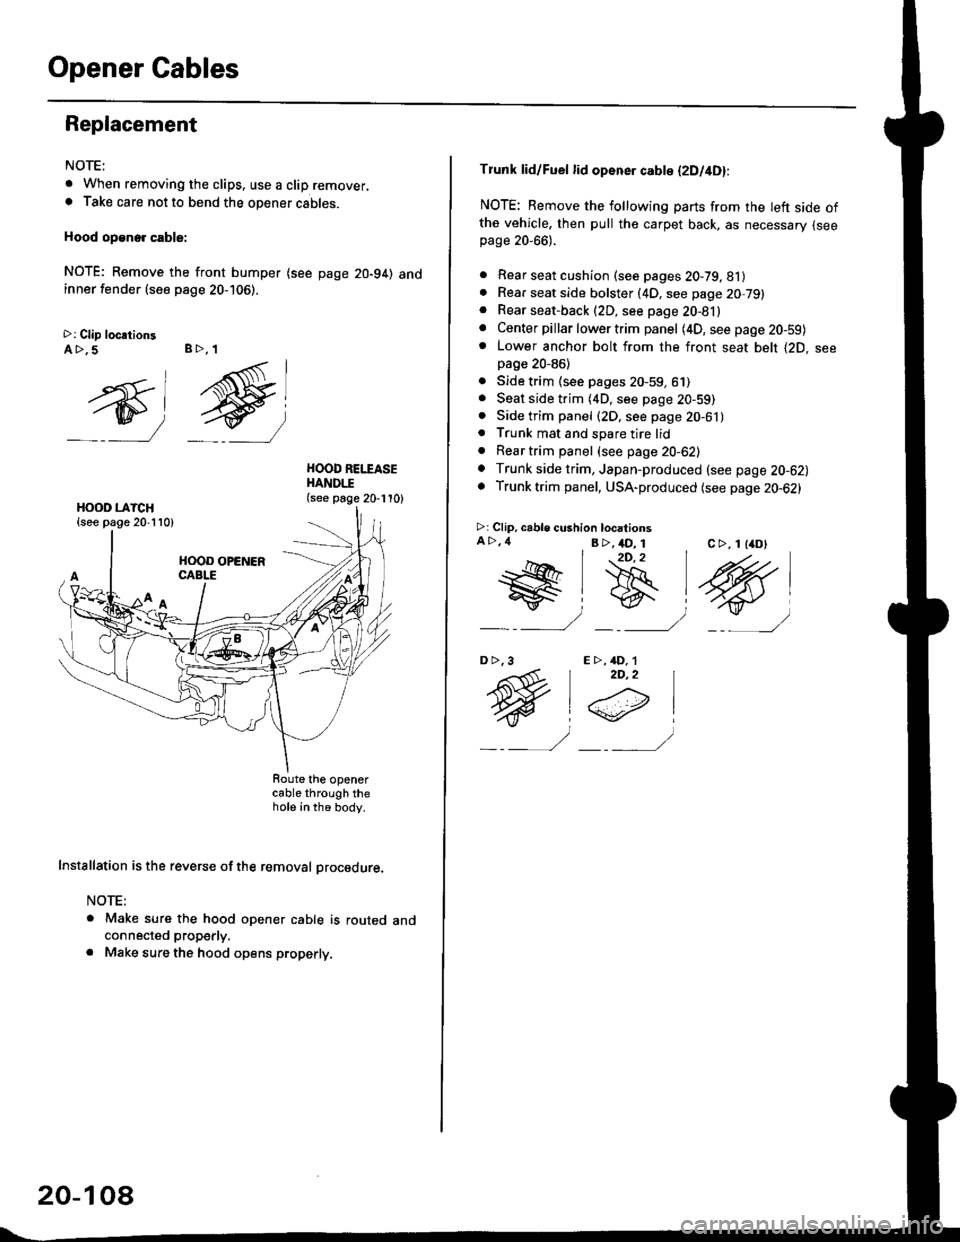 HONDA CIVIC 1999 6.G Workshop Manual Opener Cables
Replacement
NOTE:
t When removing the clips. use a clip remover.. Take care not to bend the opener cables.
Hood op€ne. cable:
NOTE; Remove the front bumper (see page 20-94) andinner fe